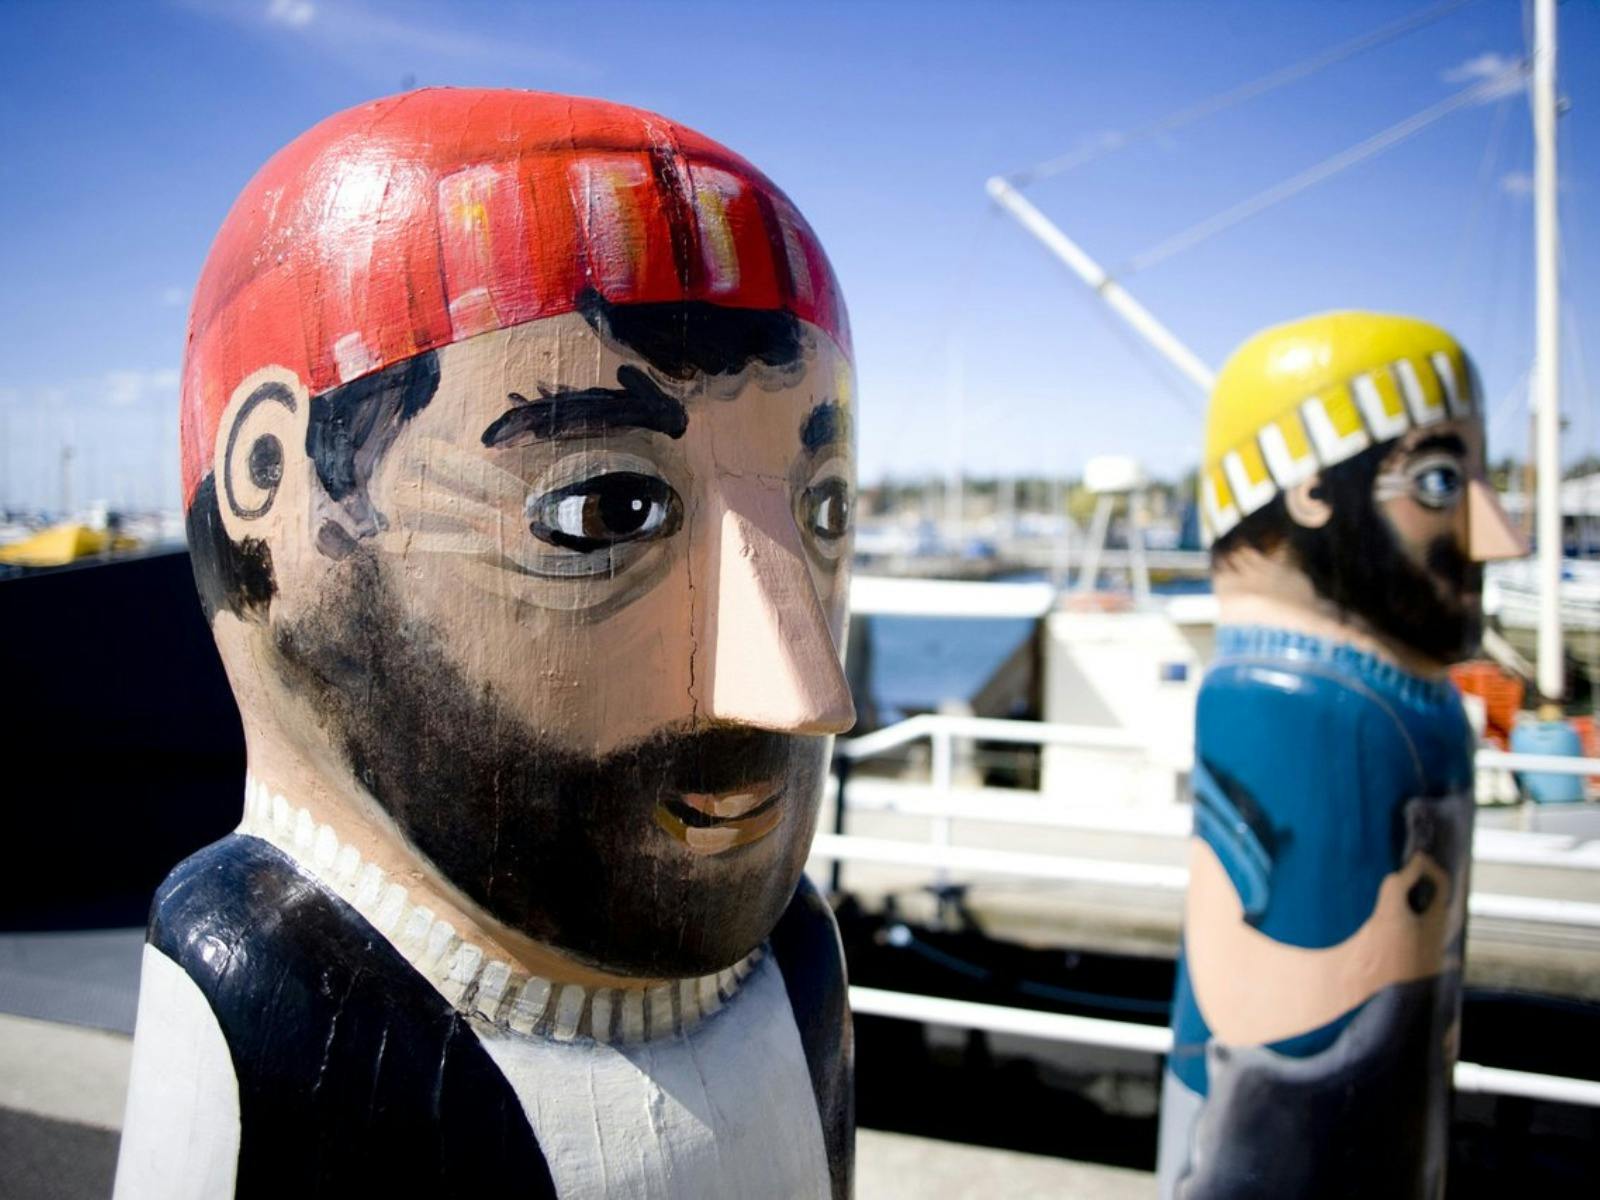 Two fisherman painted on bollards on waterfront dock